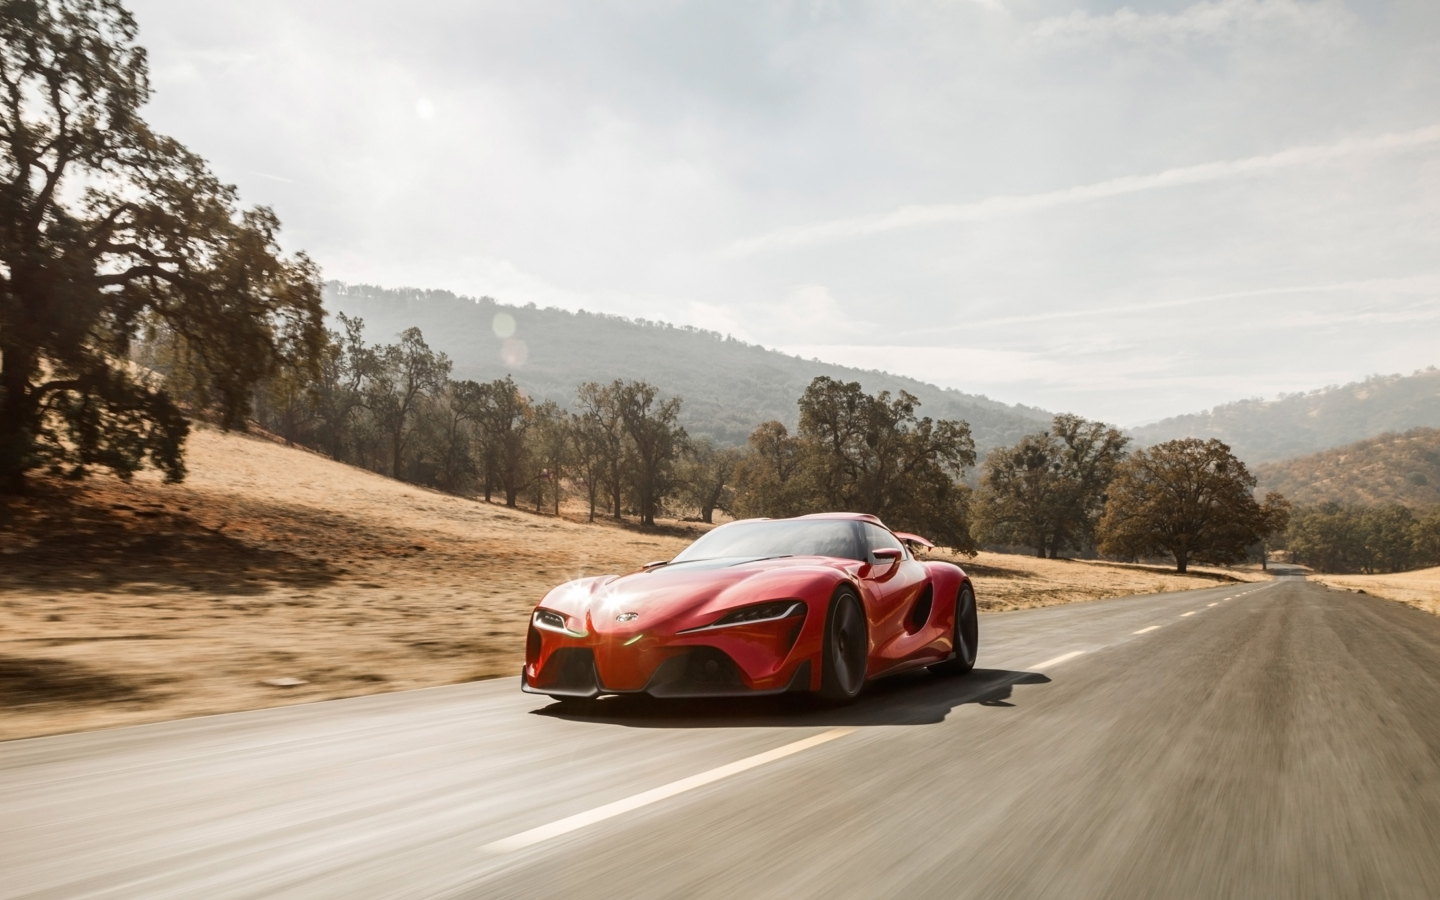 2014 Toyota Ft 1 Concept Front Angle screenshot #1 1440x900